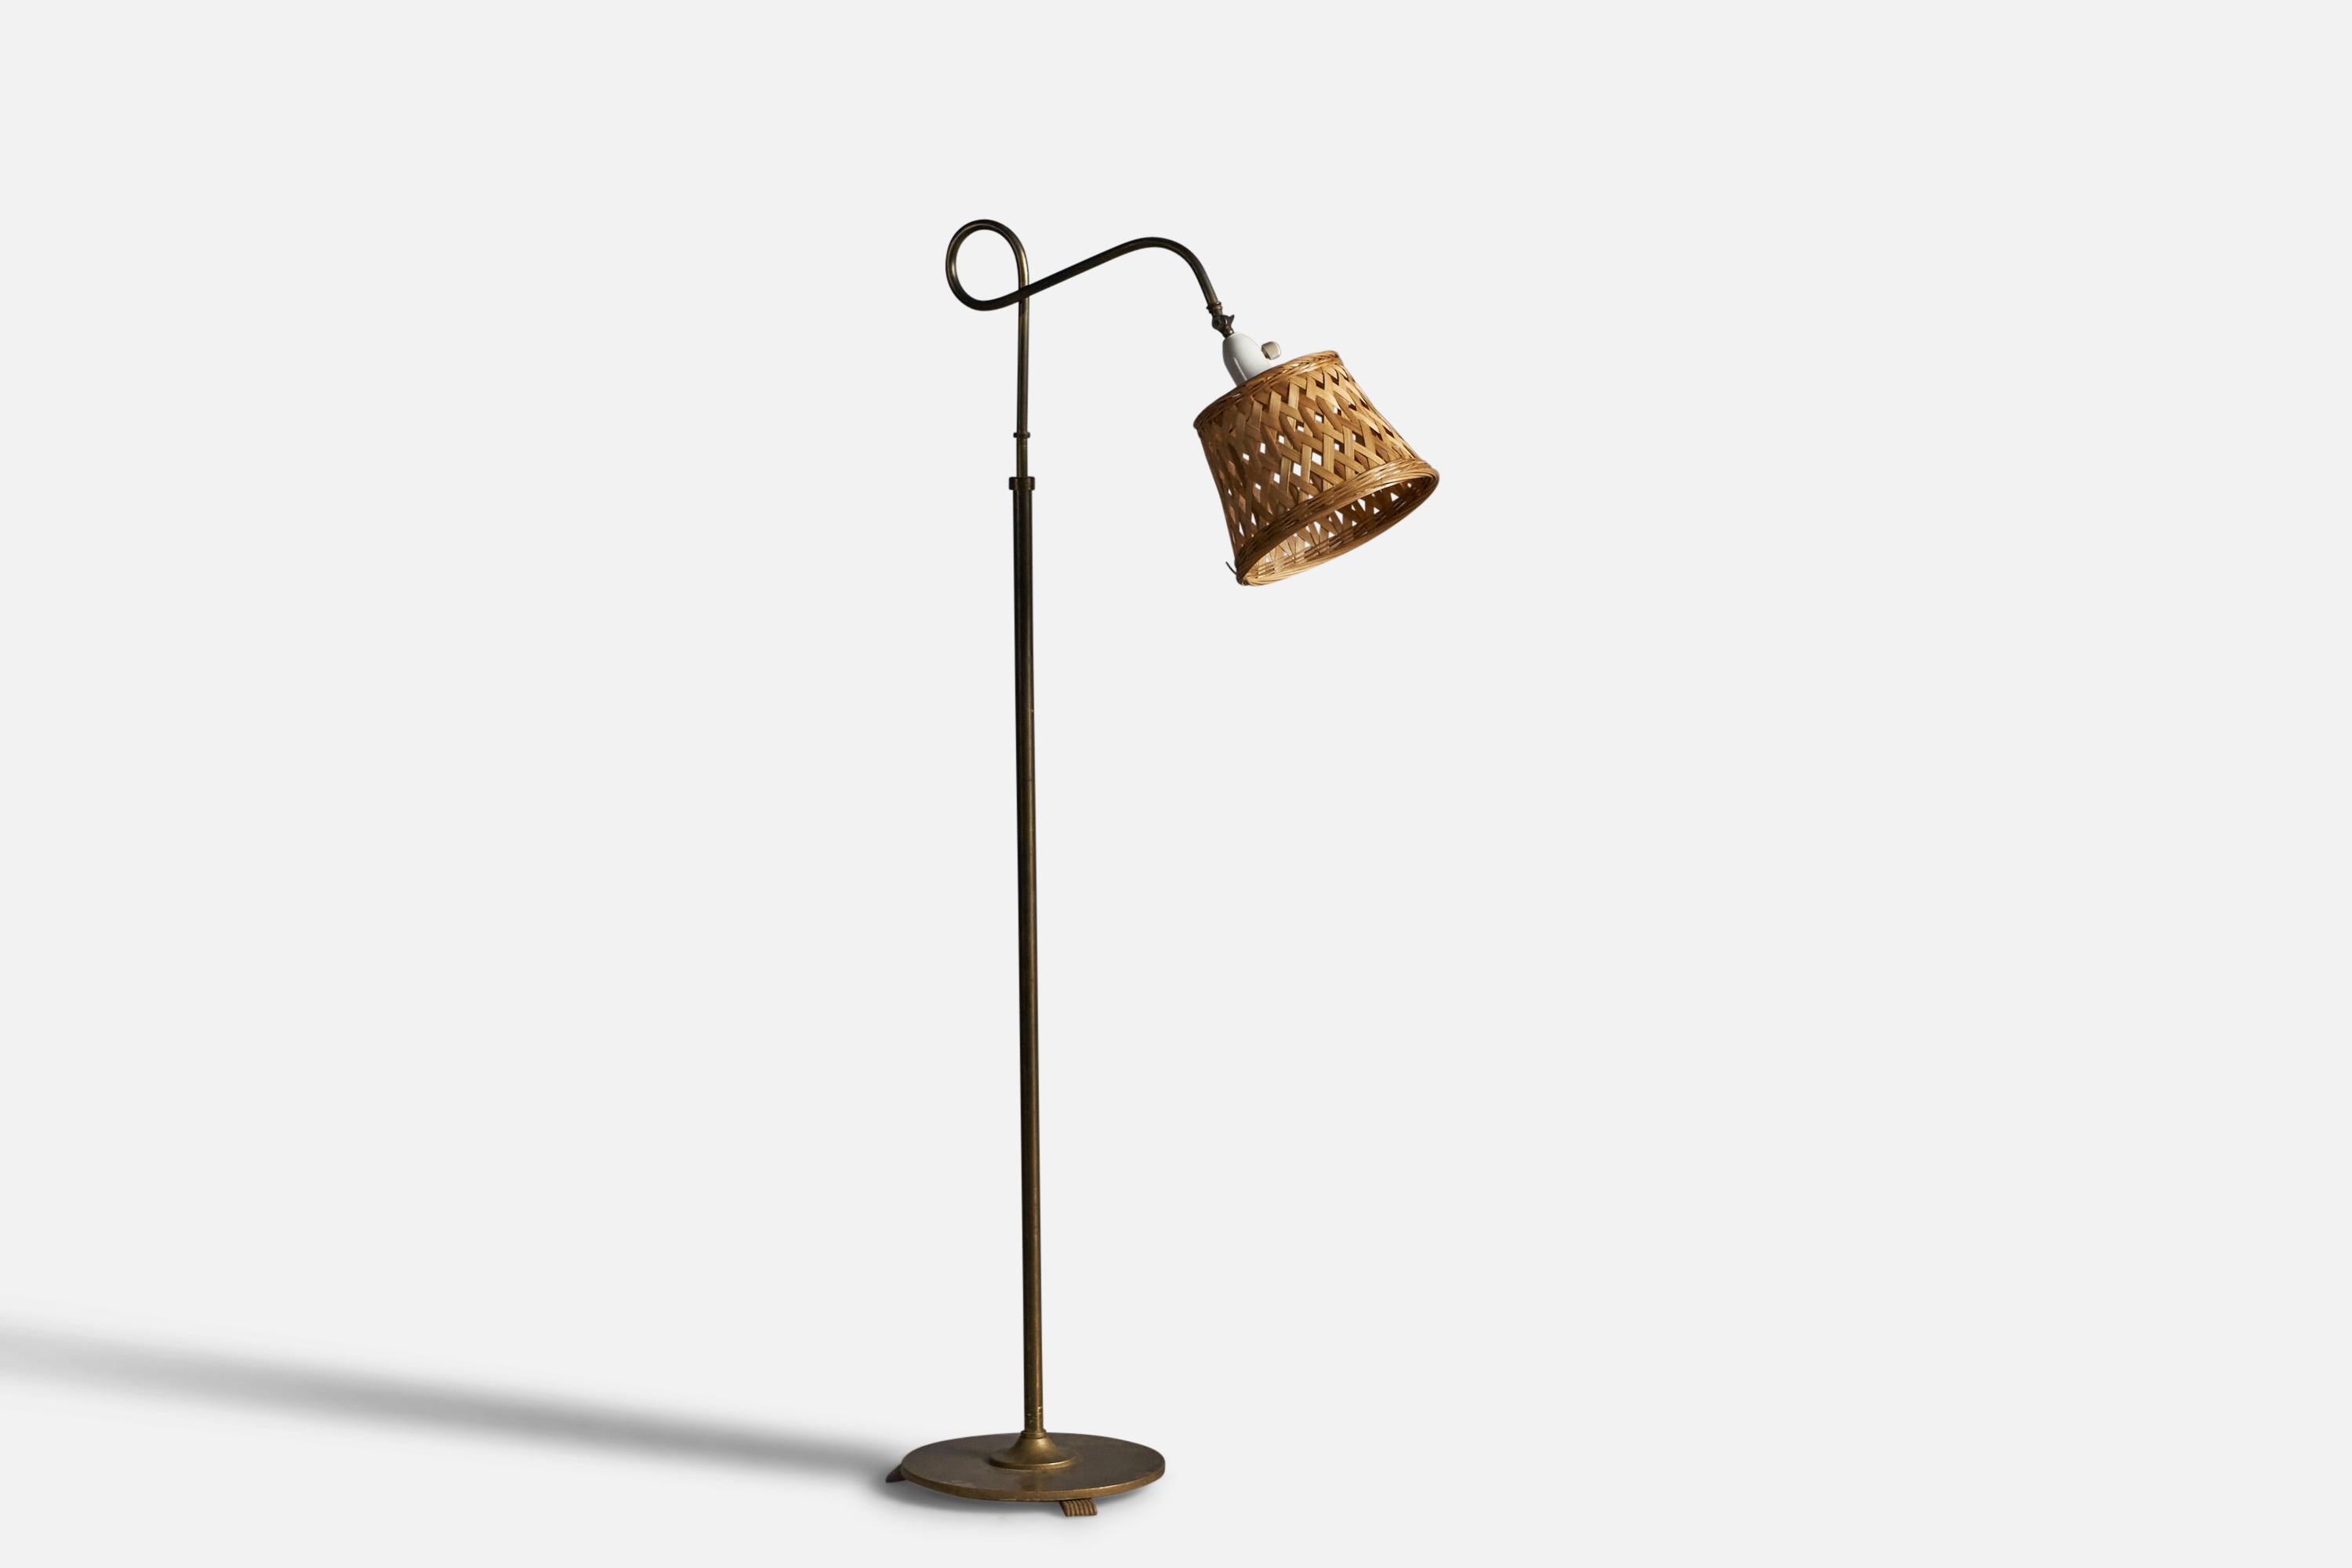 An adjustable brass and rattan floor lamp, designed and produced in Denmark, c. 1930s.

Overall Dimensions: 47